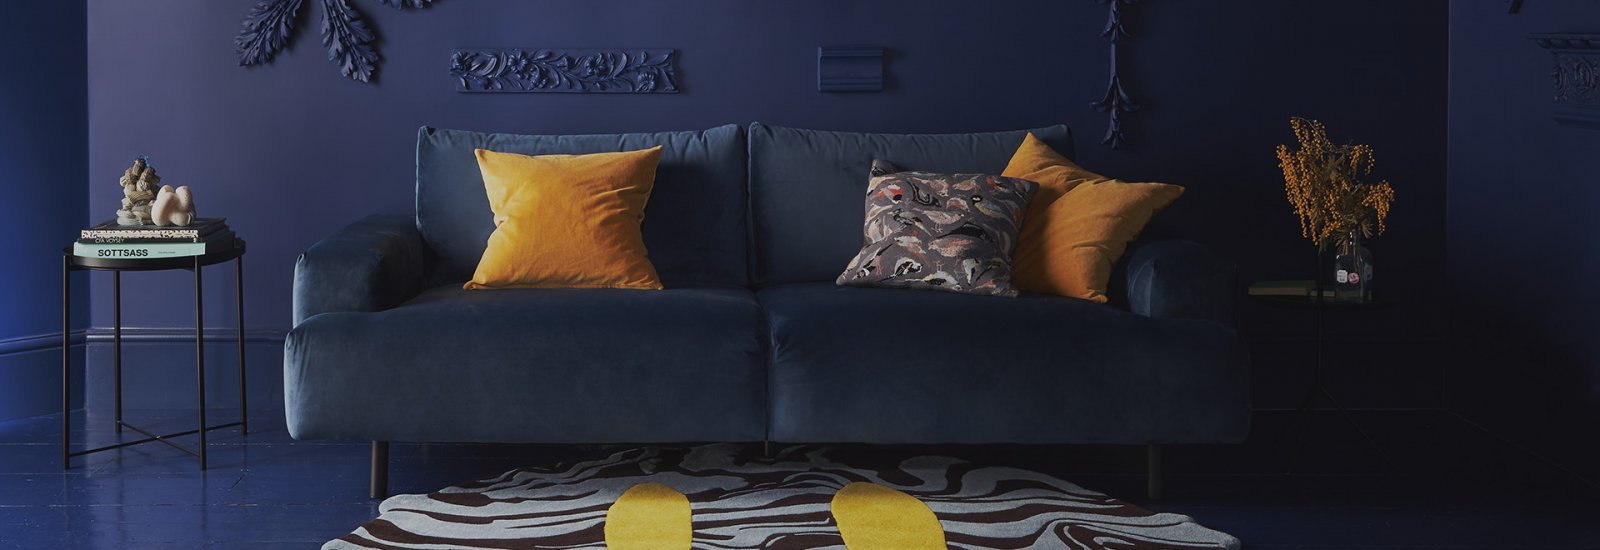 Room with dark blue walls and sofa featuring a large rug with yellow smiley face